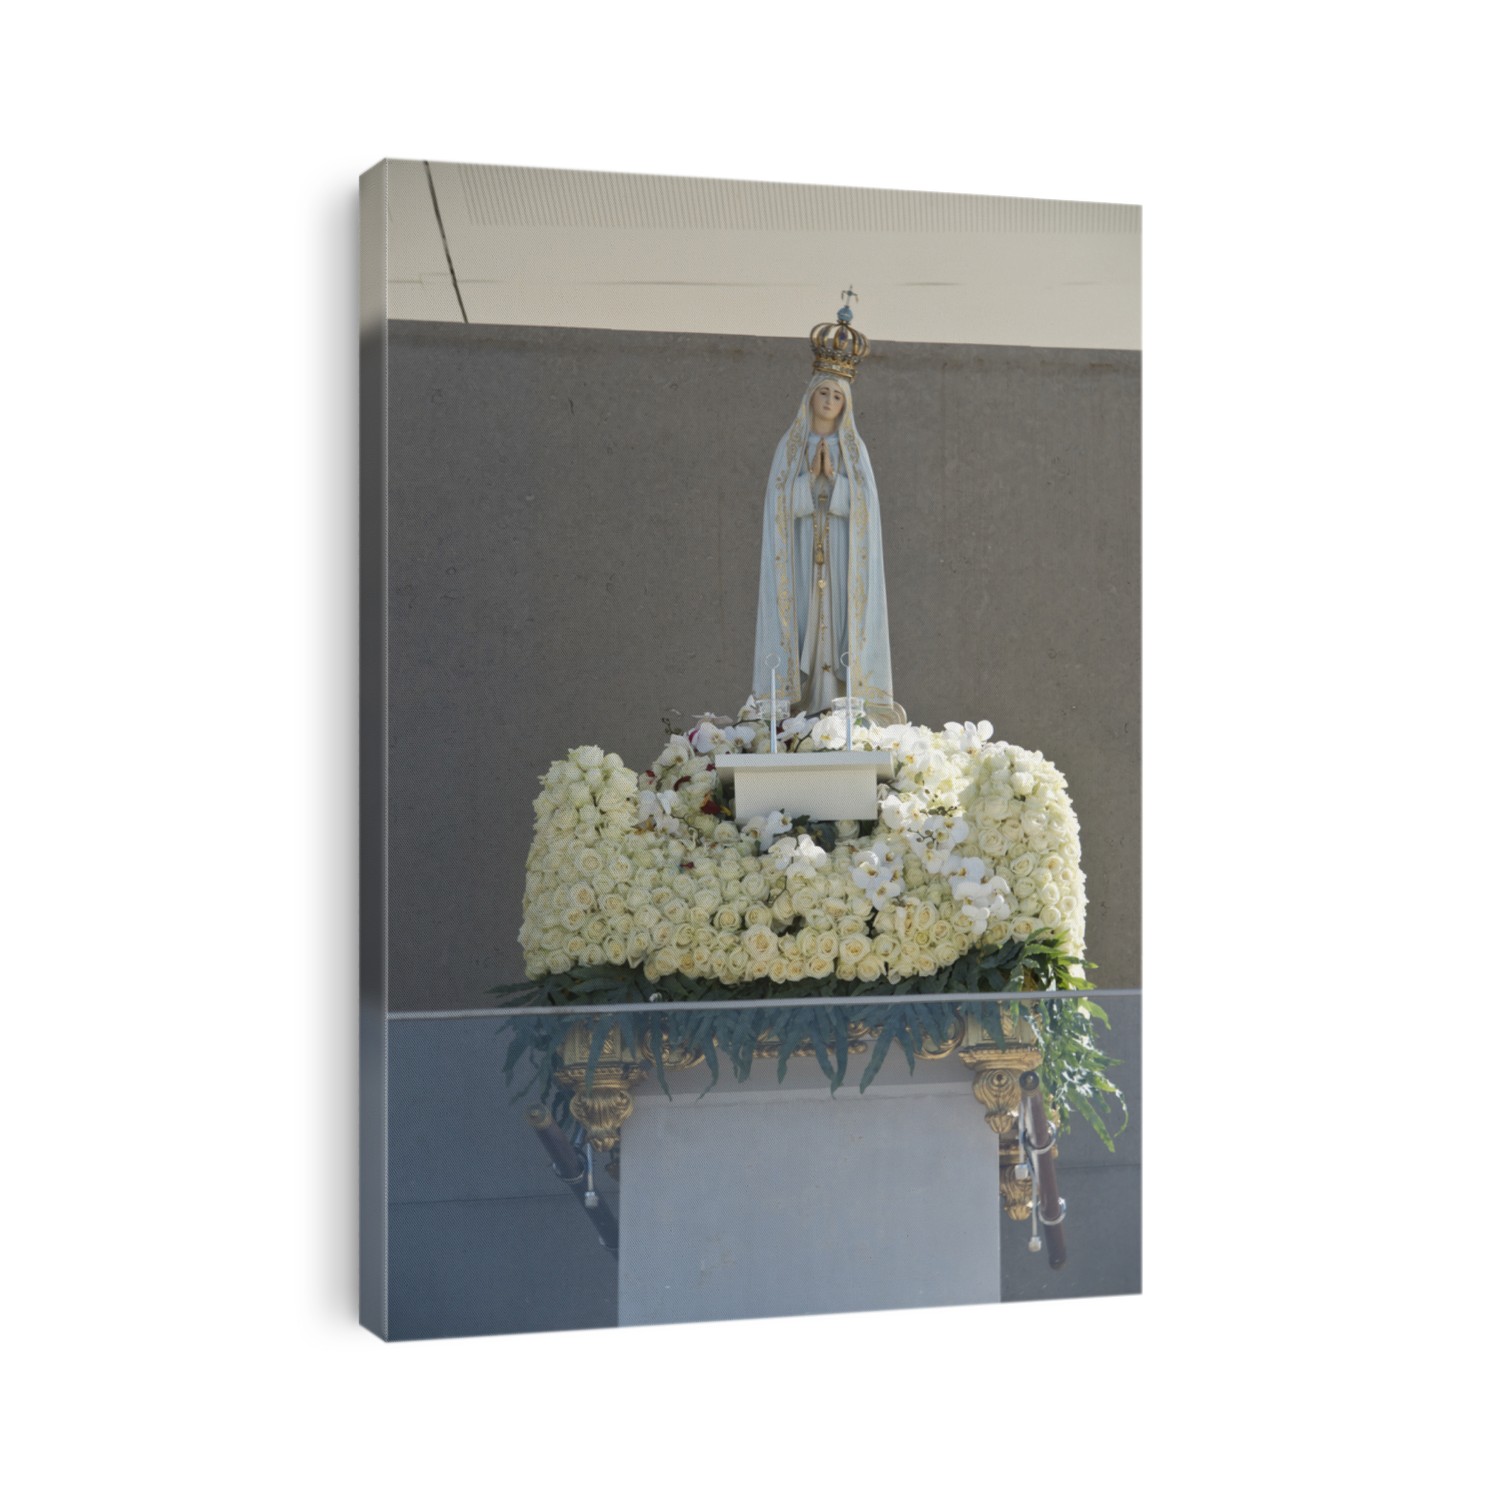 The image of Our Lady of Fatima at the altar in the Sanctuary of Our Lady of Fatima, Portugal.